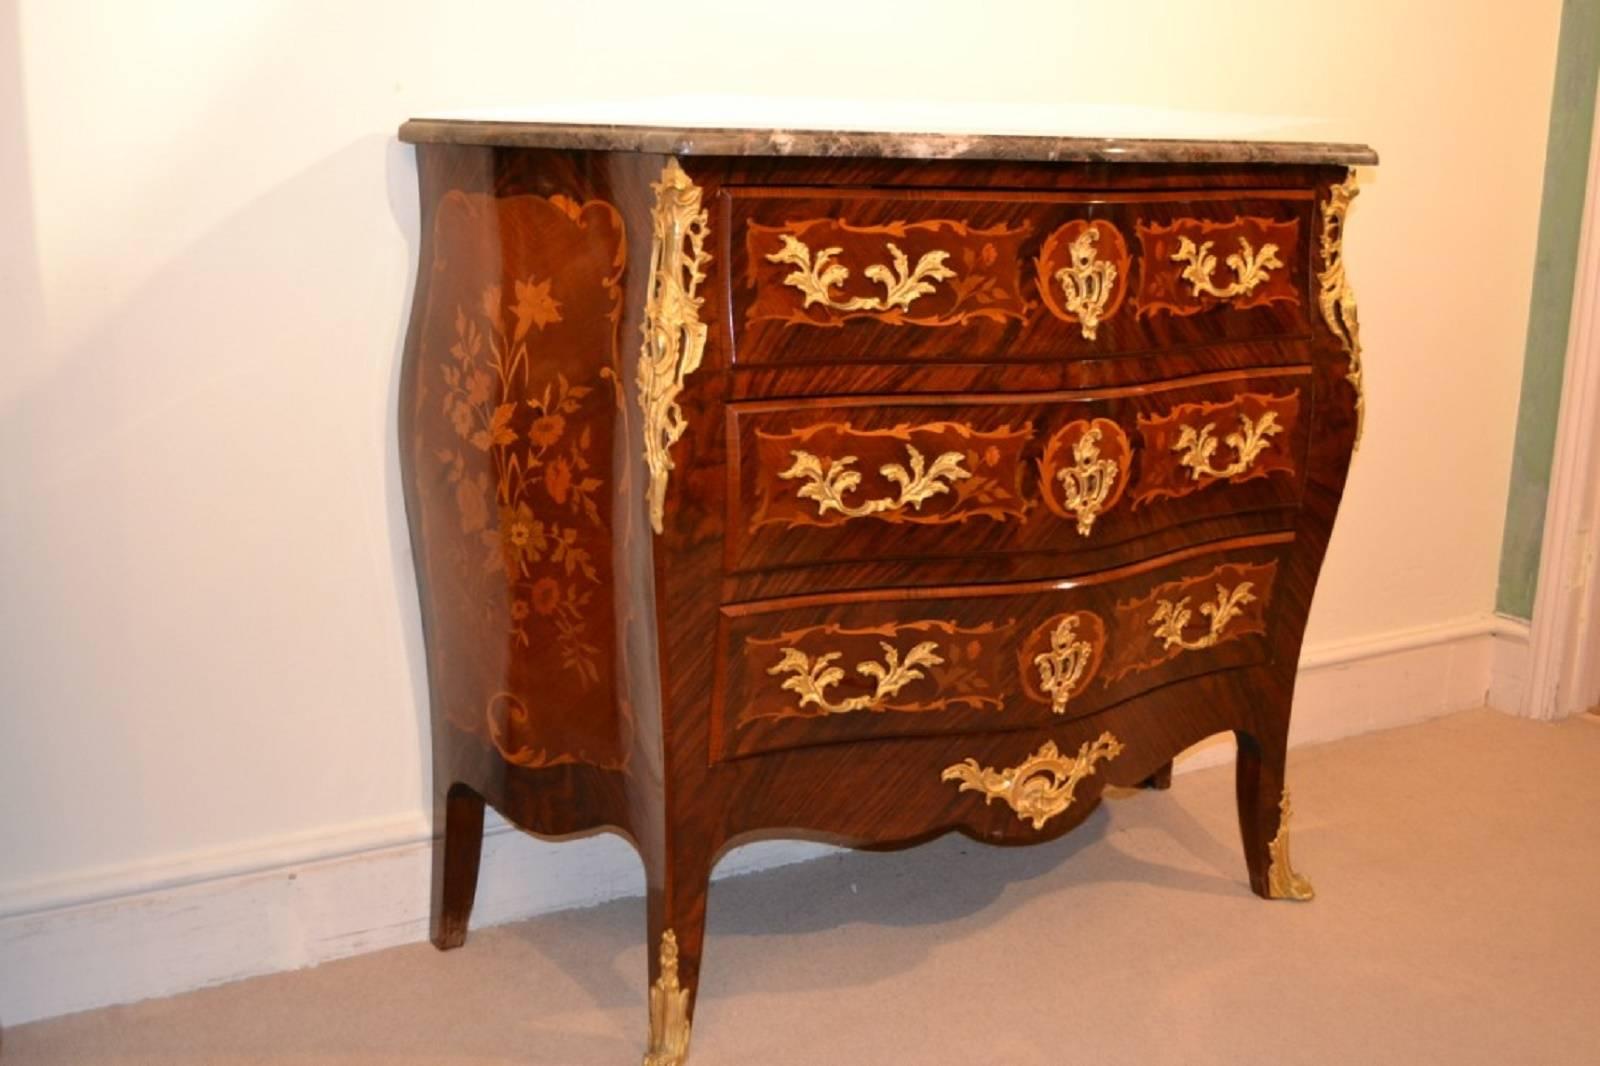 This is a beautiful antique rosewood and fruitwood inlaid serpentine commode, circa 1880 in date and in the Louis XV manner. 

This gorgeous commode has three capacious drawers for ample storage and was inspired by the Louis XV style. Elaborately